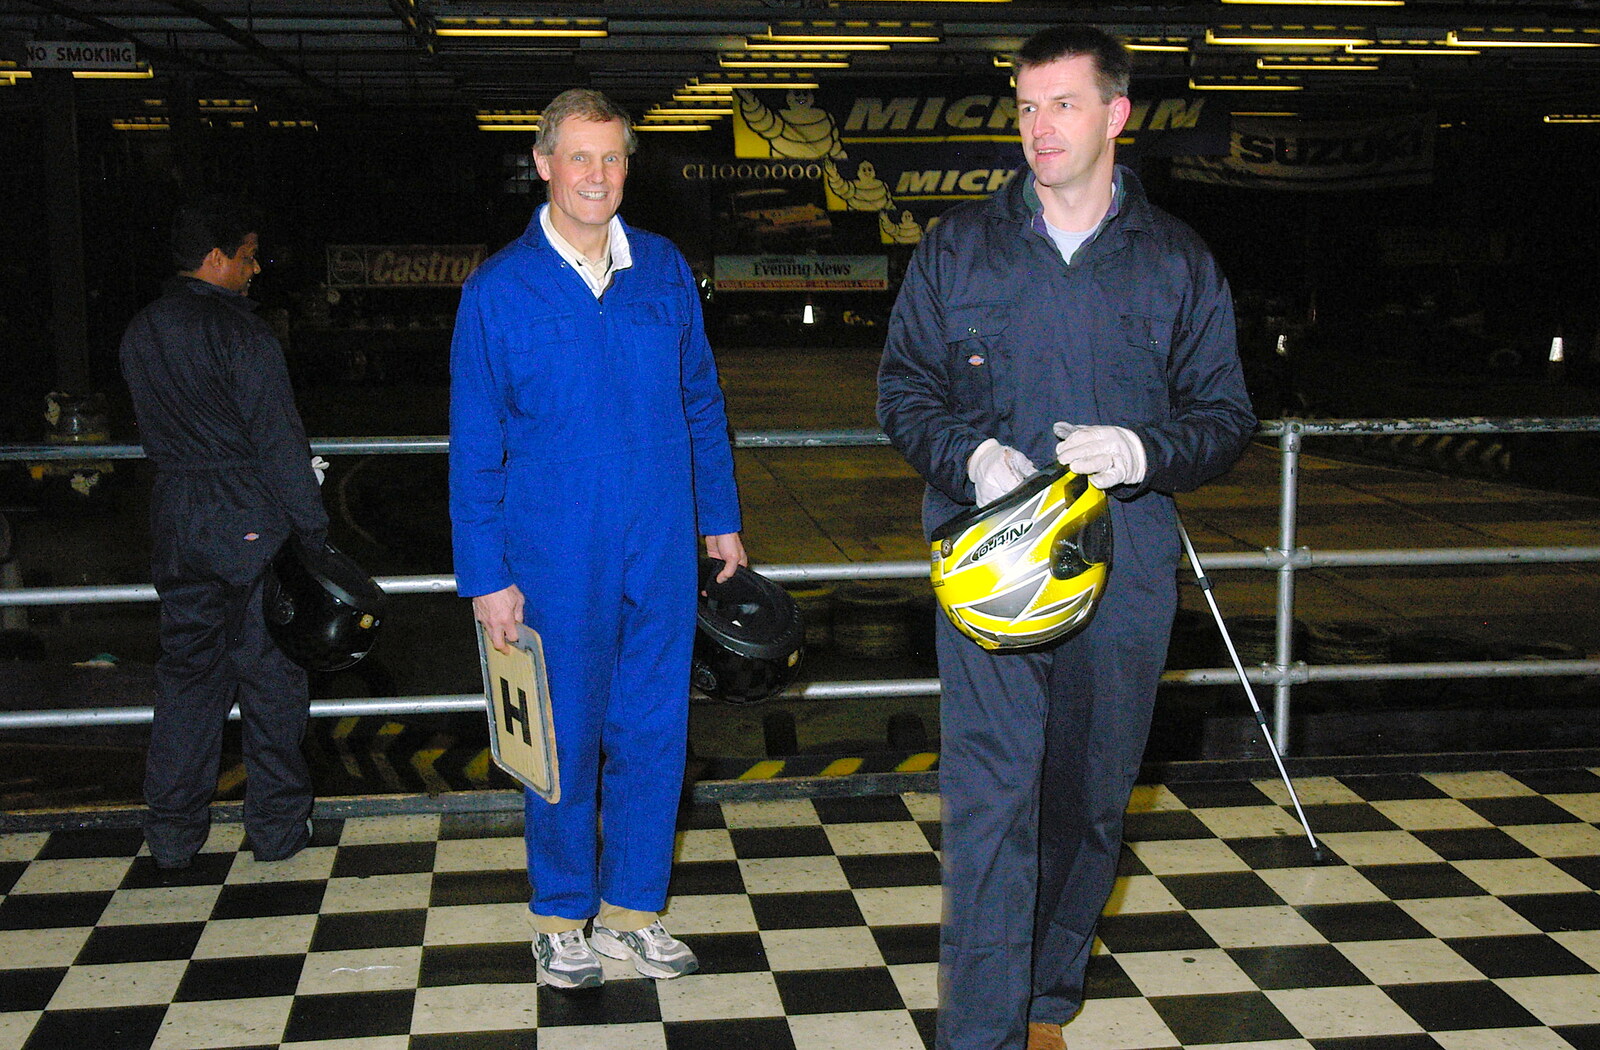 Tim and John Scott from Qualcomm goes Karting in Caxton, Cambridgeshire - 7th November 2005